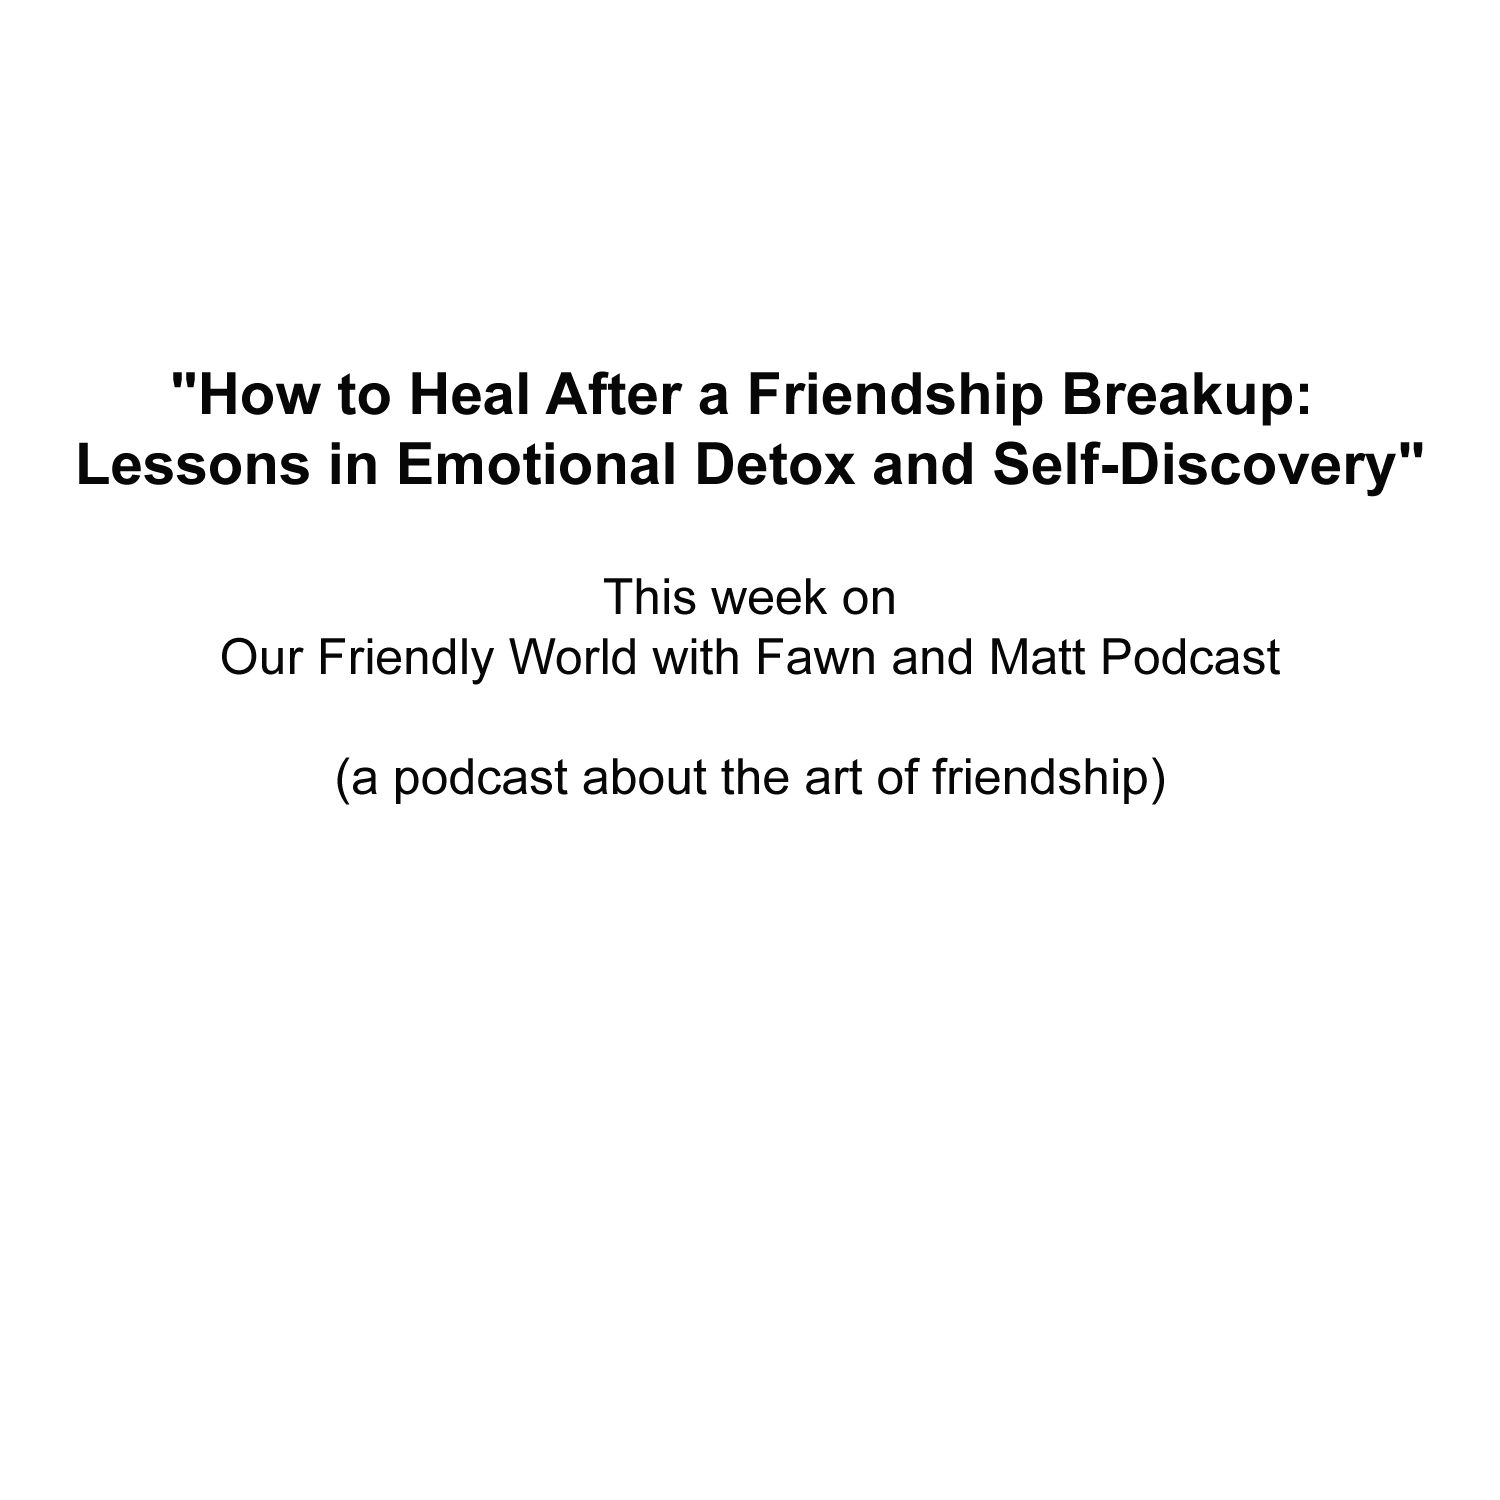 Episode image for How to Heal After a Friendship Breakup Lessons in Emotional Detox and Self-Discovery